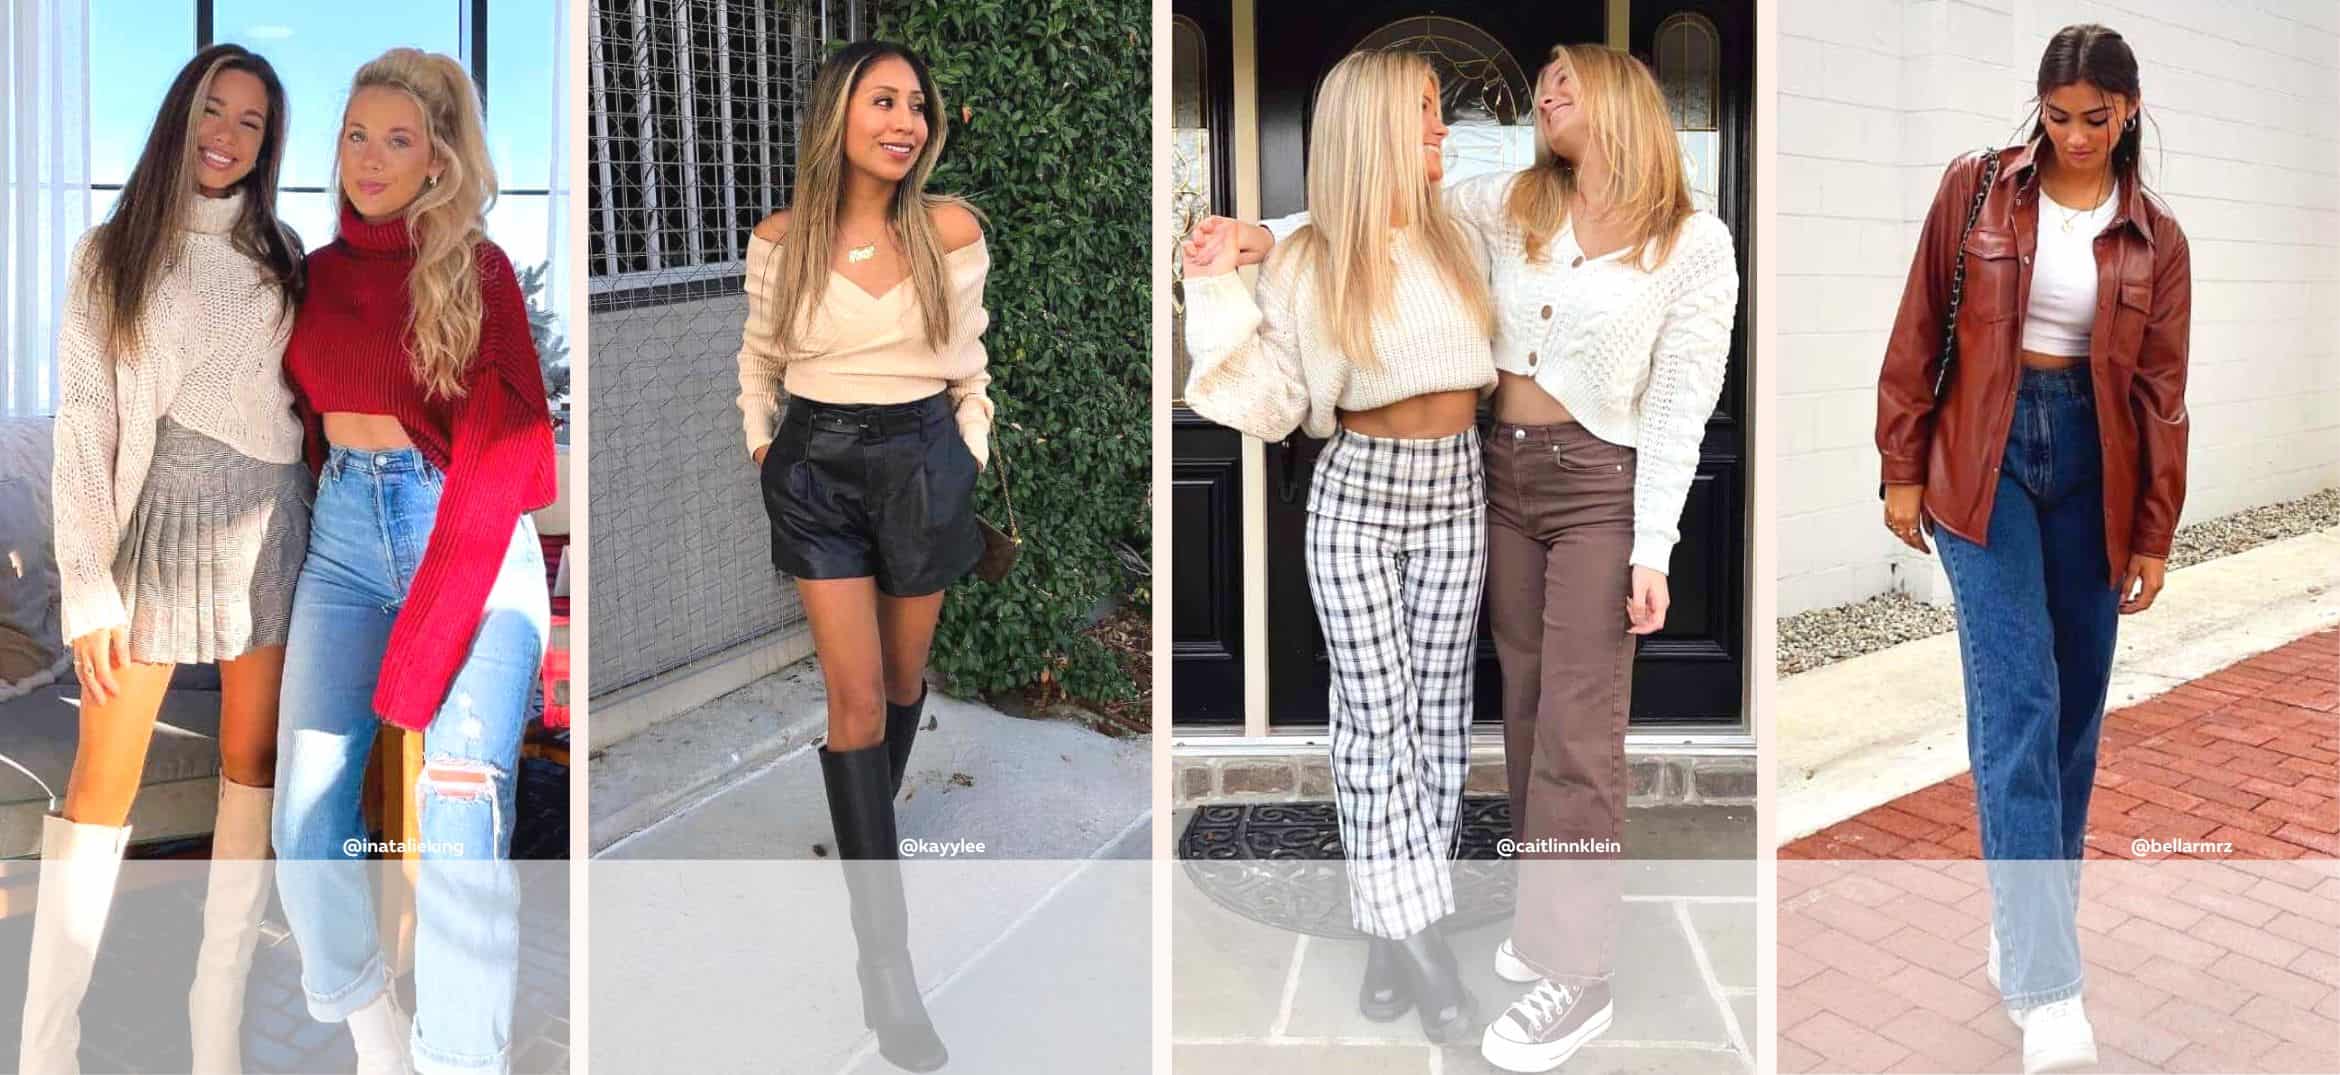 Friendsgiving, Thanksgiving, WhateverGivingYou'll Need A Cute Outfit!